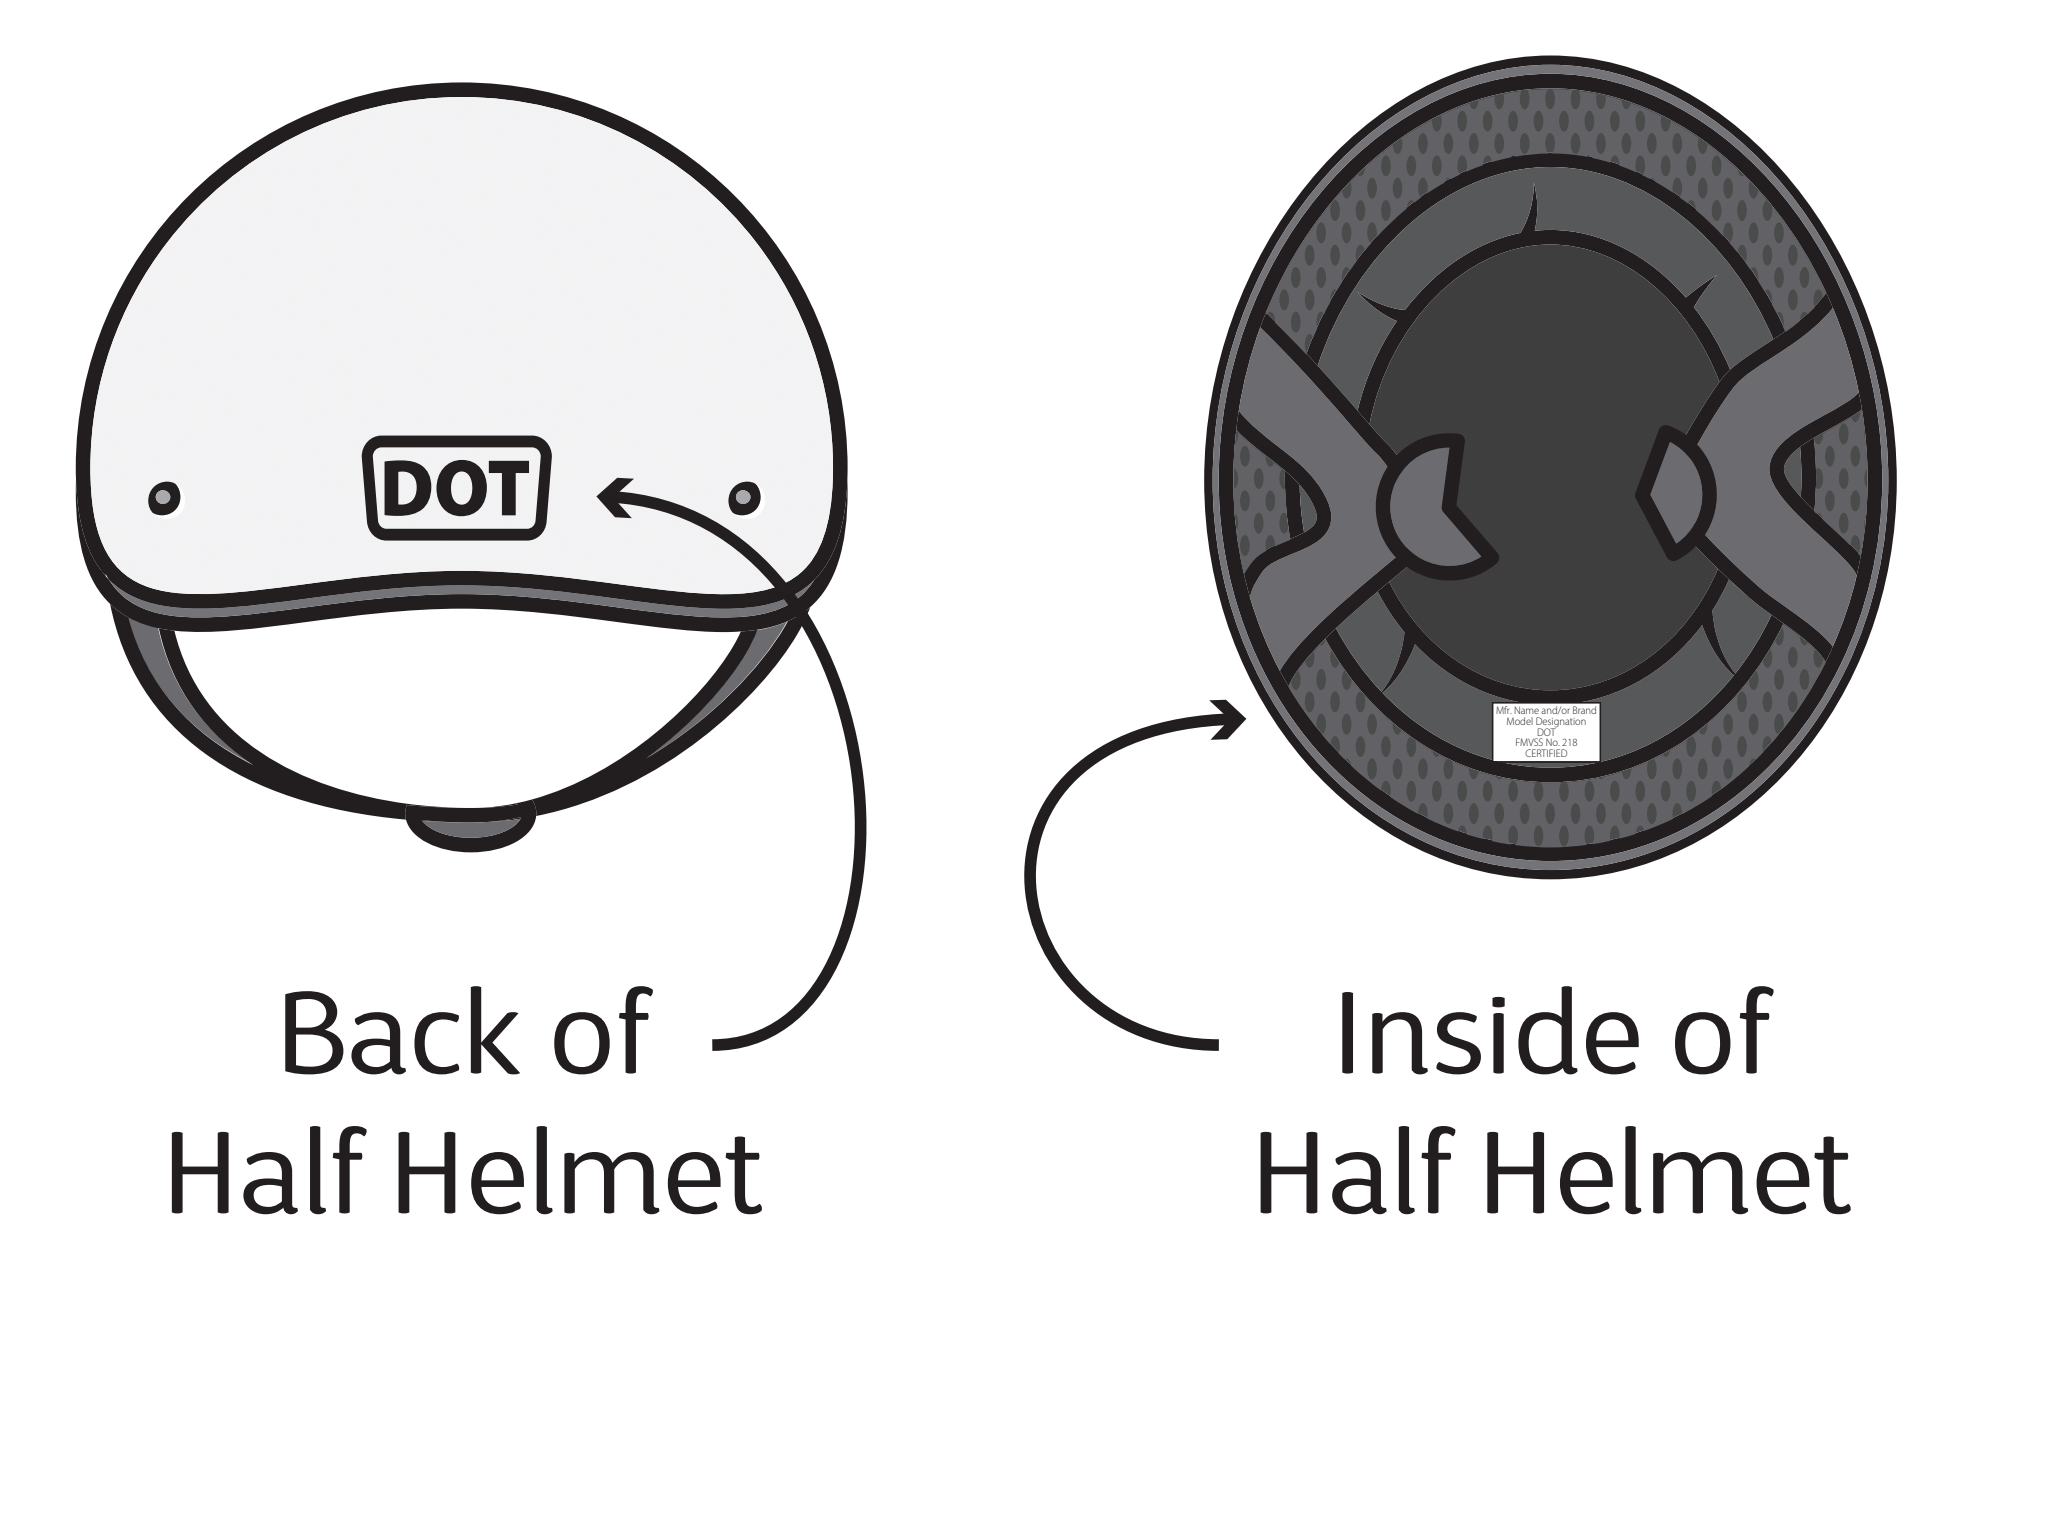 image of the back and inside of a half helmet